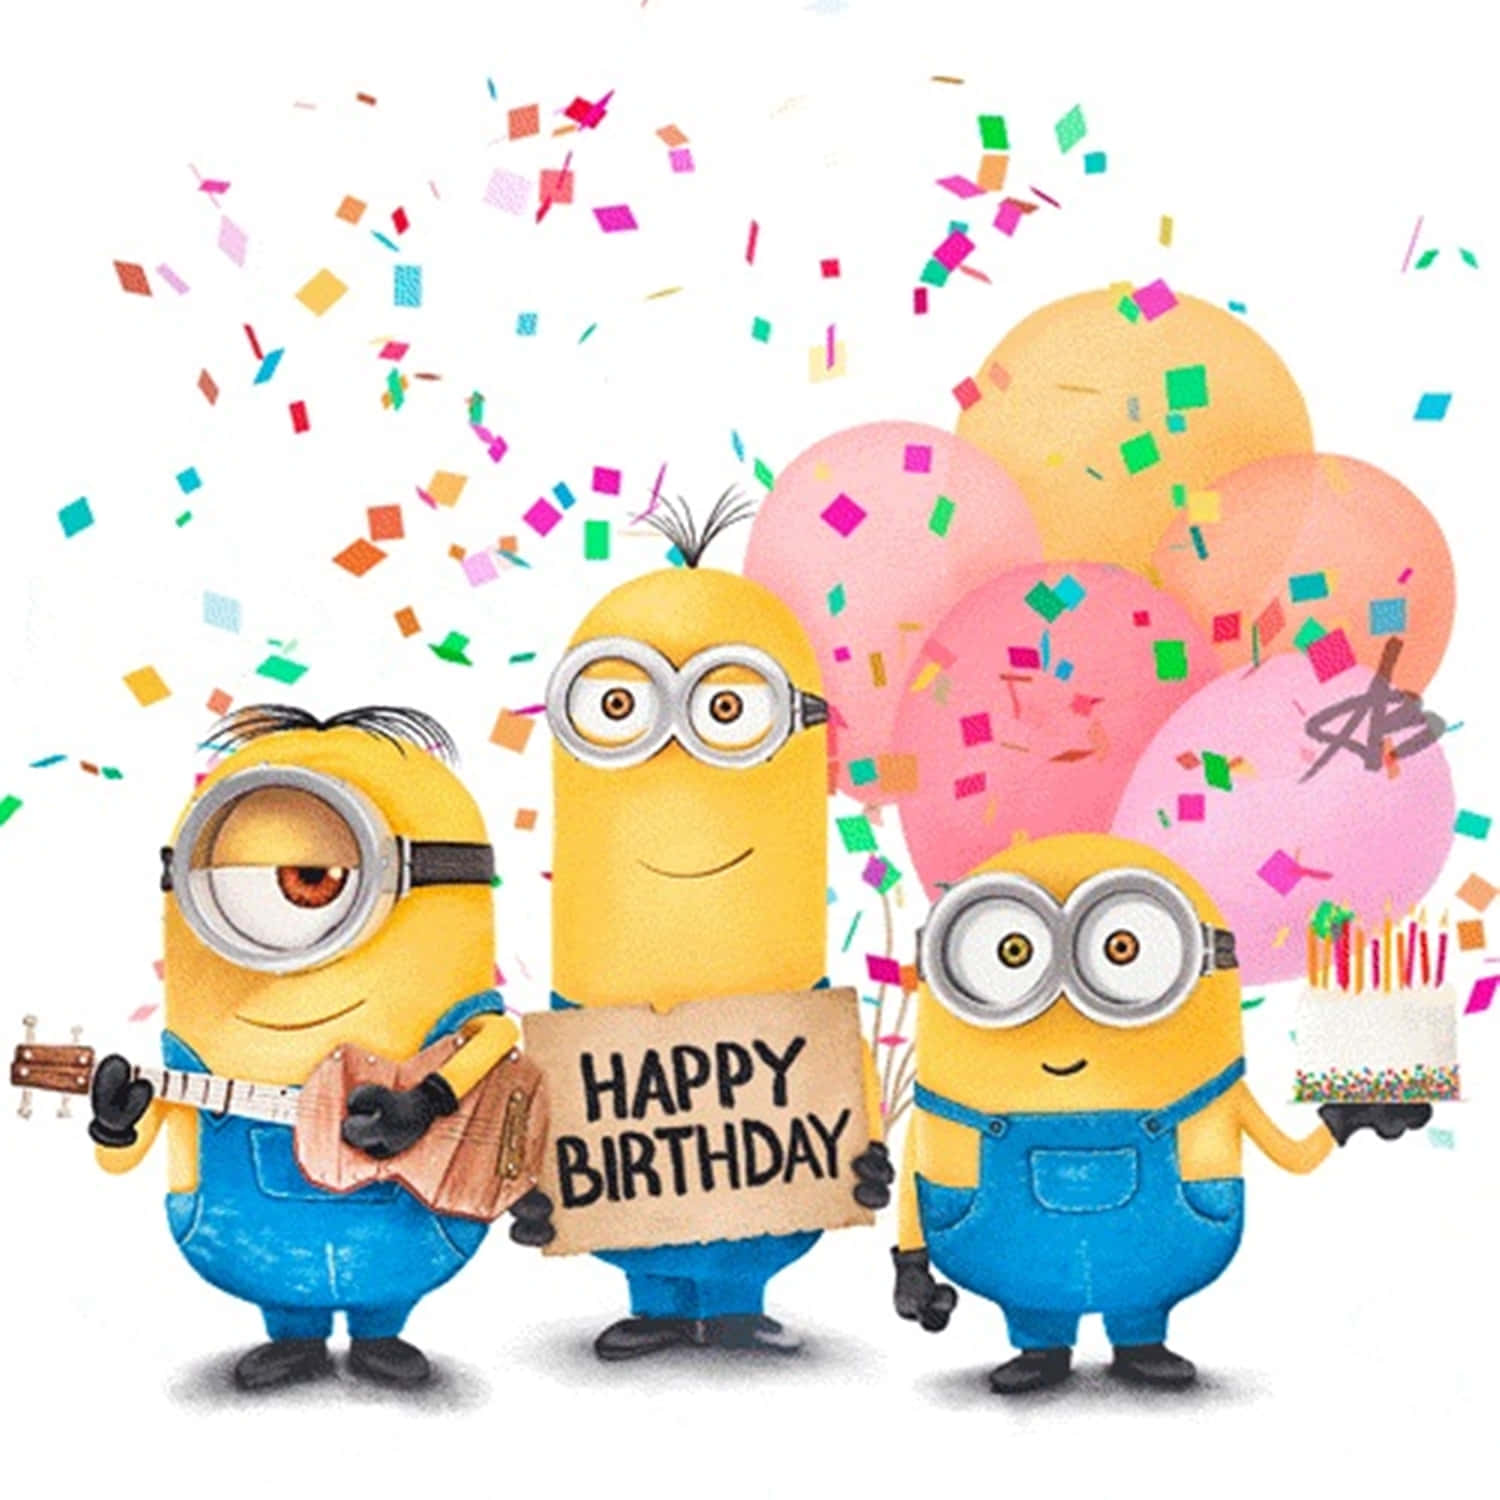 Minions Holding A Happy Birthday Sign And Confetti Wallpaper